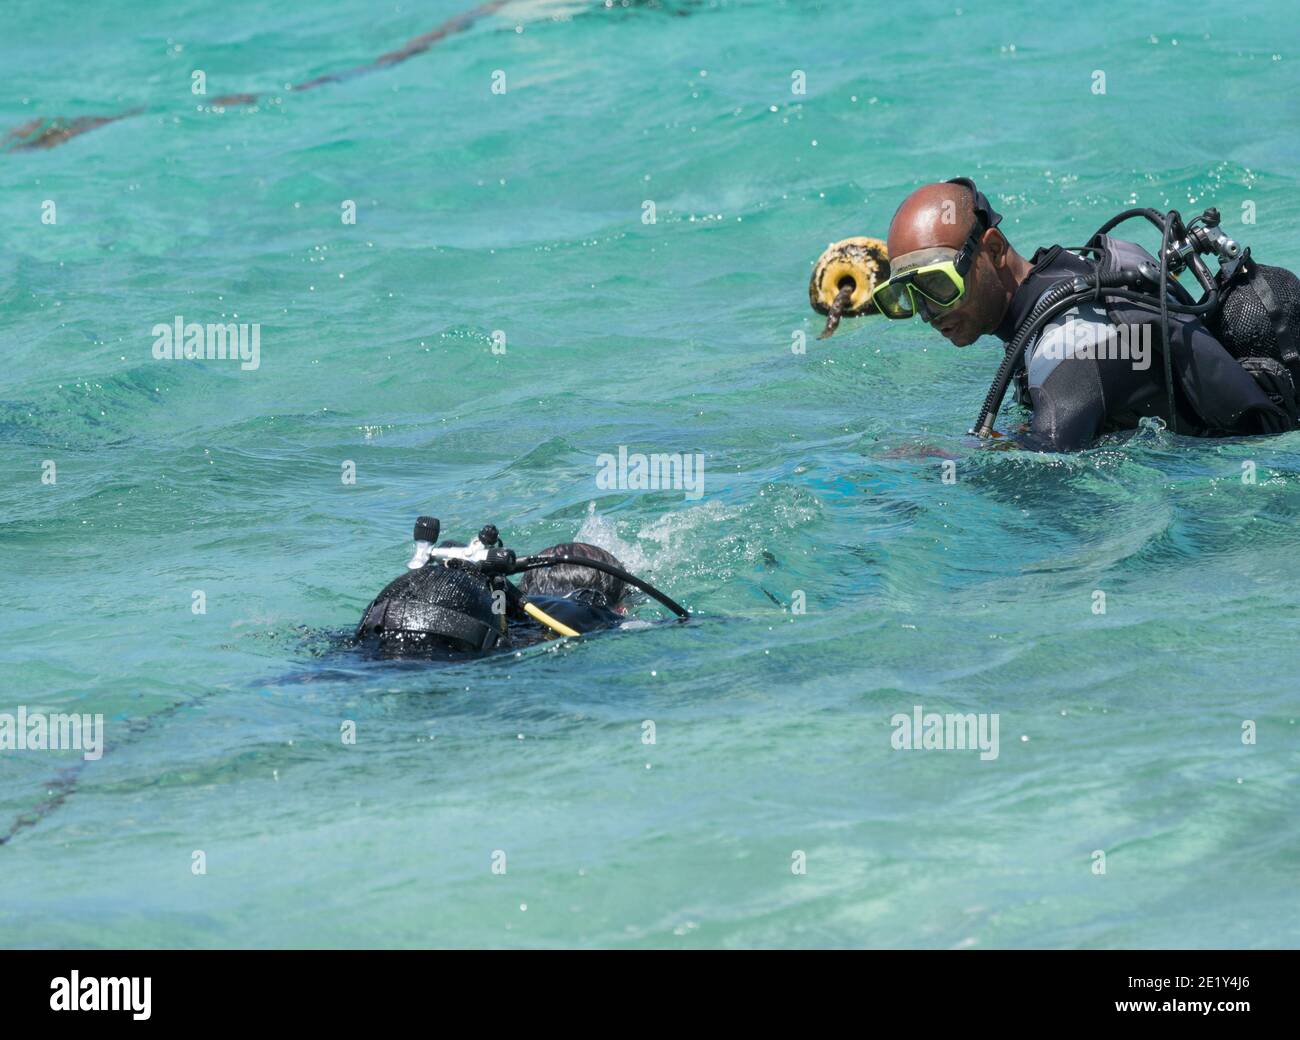 scuba diving private one one one lesson in the sea at the tropical island of Mauritius concept leisure or recreational activity on holiday Stock Photo